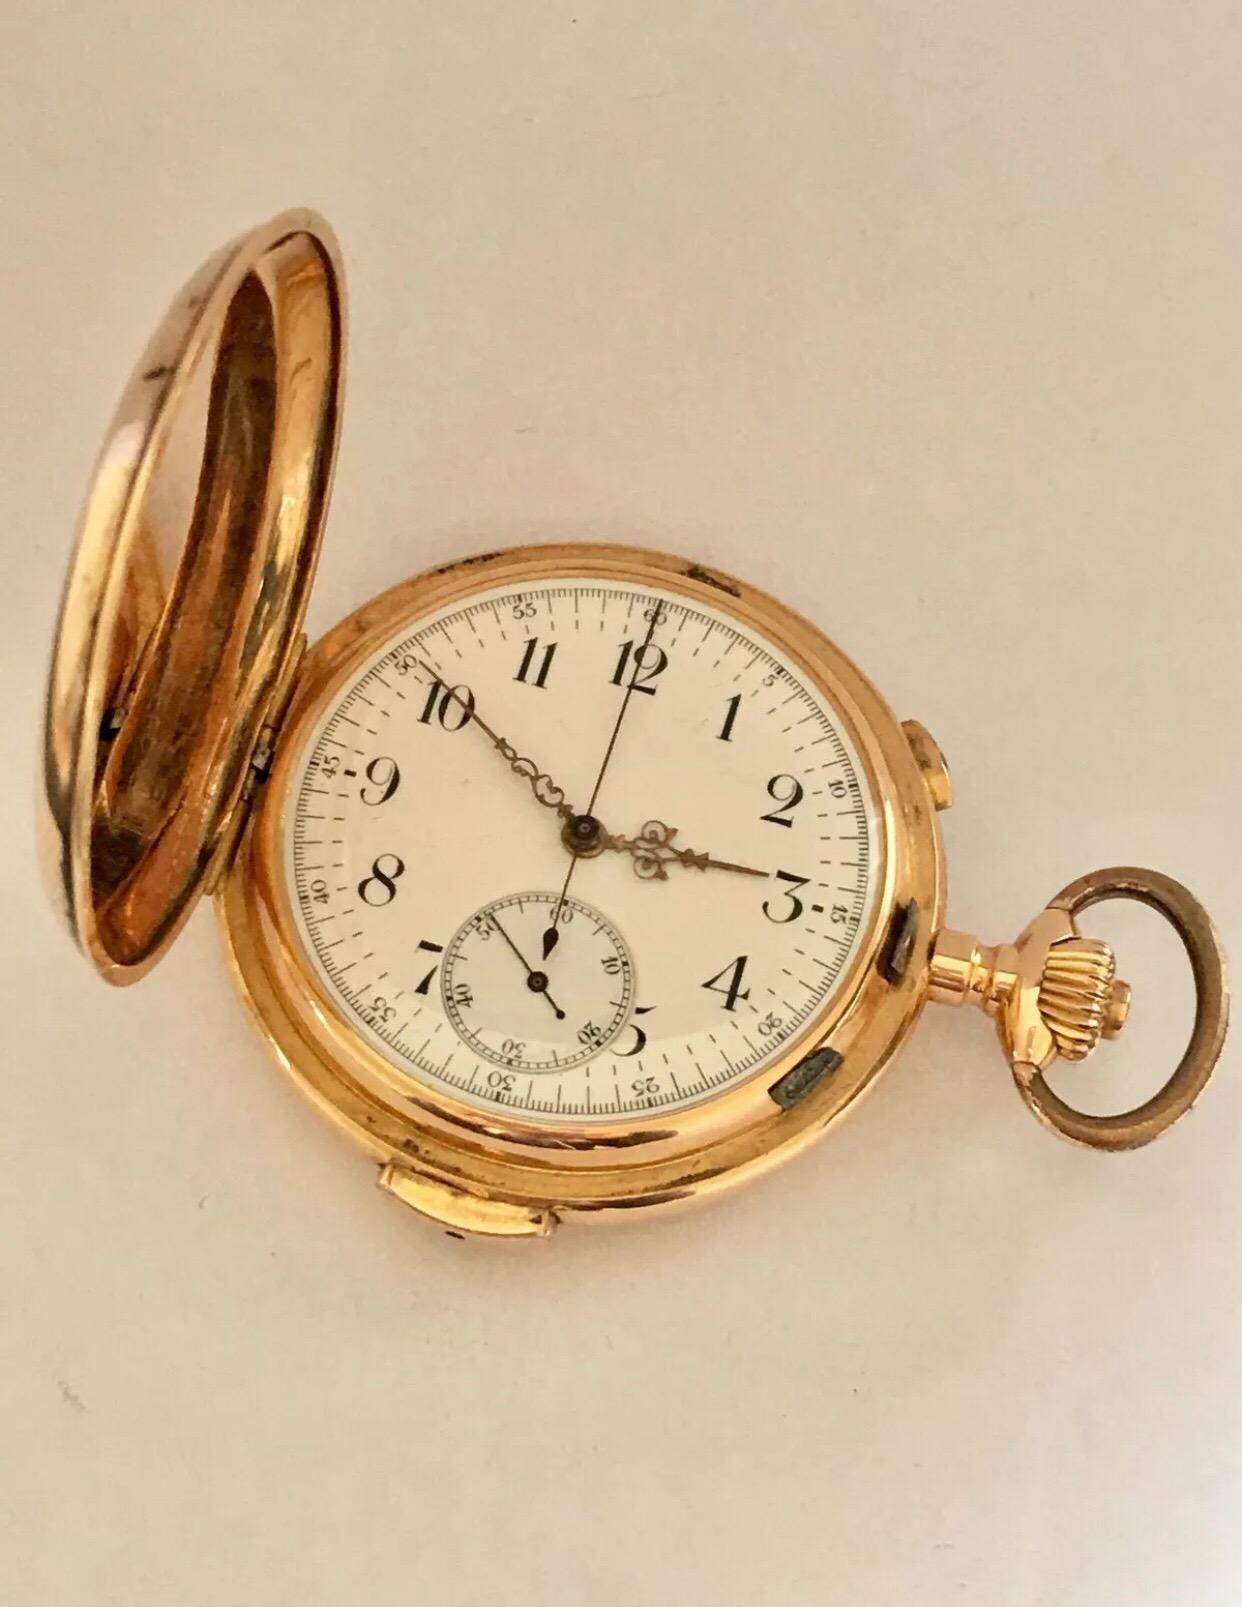 
Case


Original 18k solid gold case

Very small scratches and one obvious tiny dent Excellent shine

This is a 120 year old 18k gold which is in extraordinary condition

A large watch measuring 52mm the case.

Hunter Case with 4 'doors'.

The loop